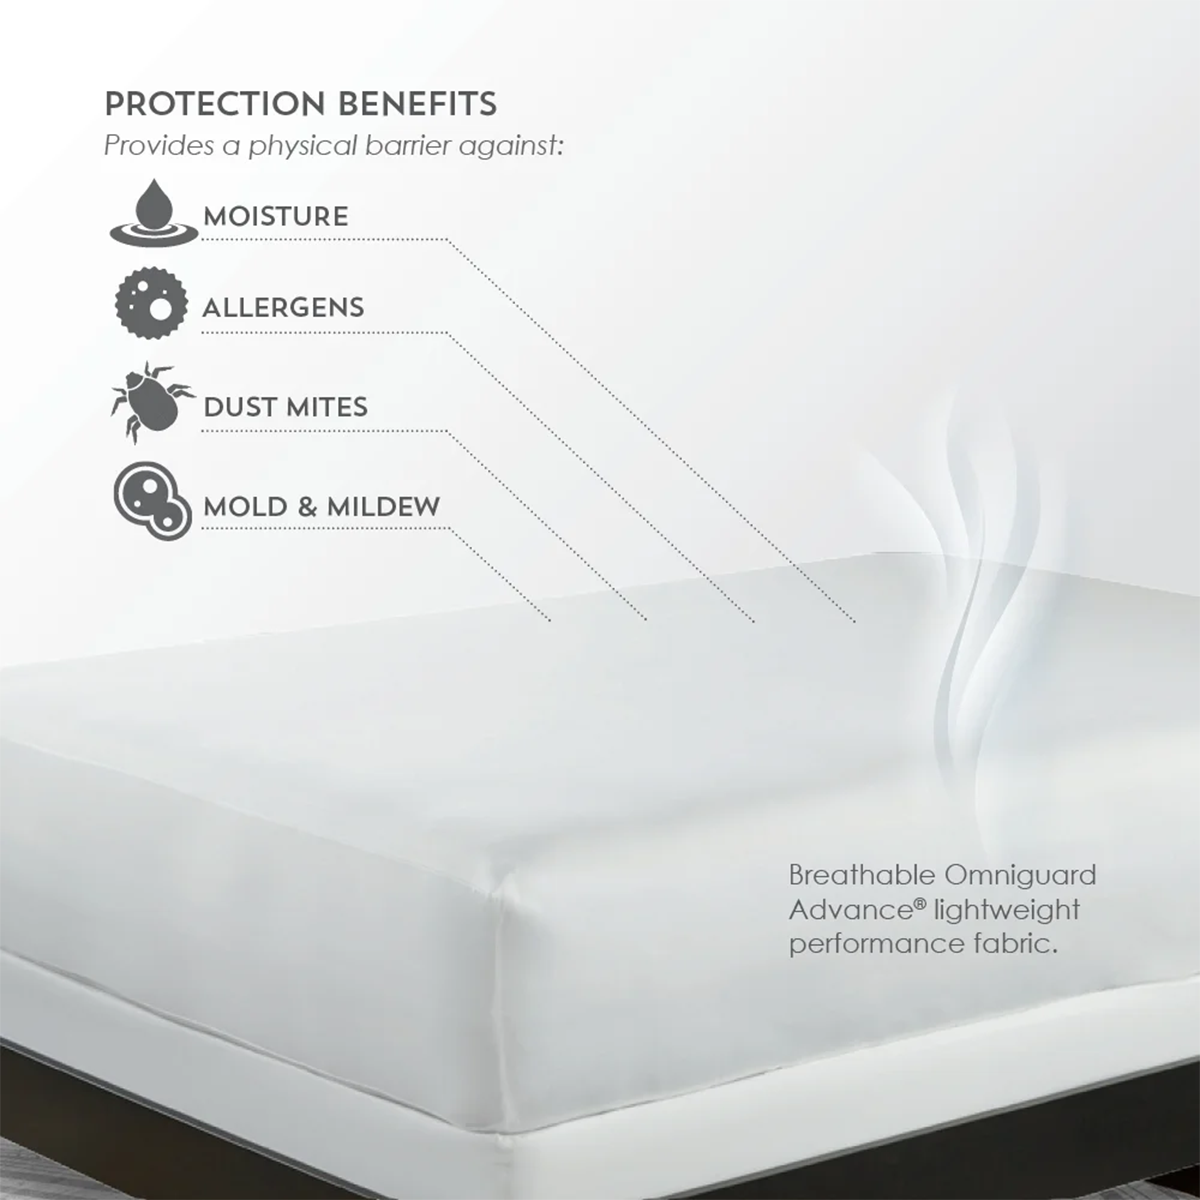 celliant mattress protector by purecare protection benefits for people with alergies